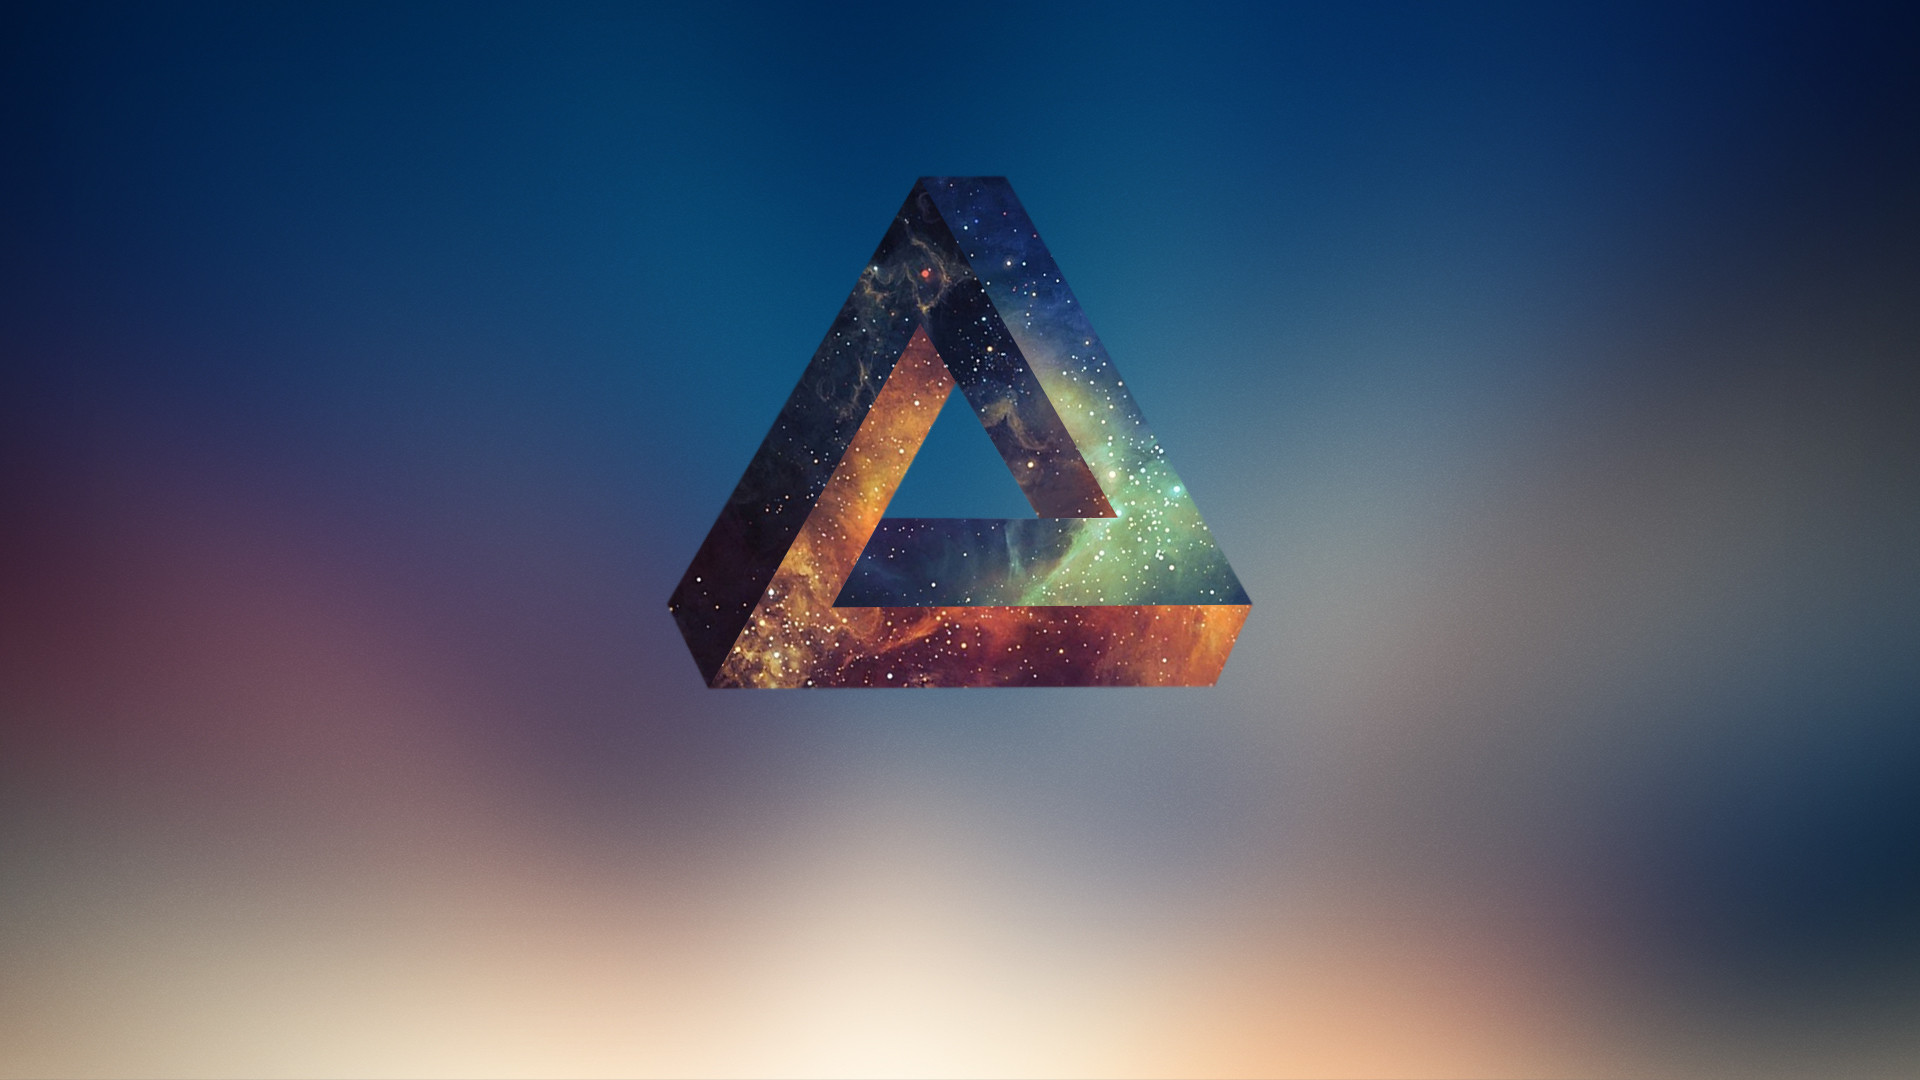 General 1920x1080 abstract triangle space stars Penrose triangle minimalism